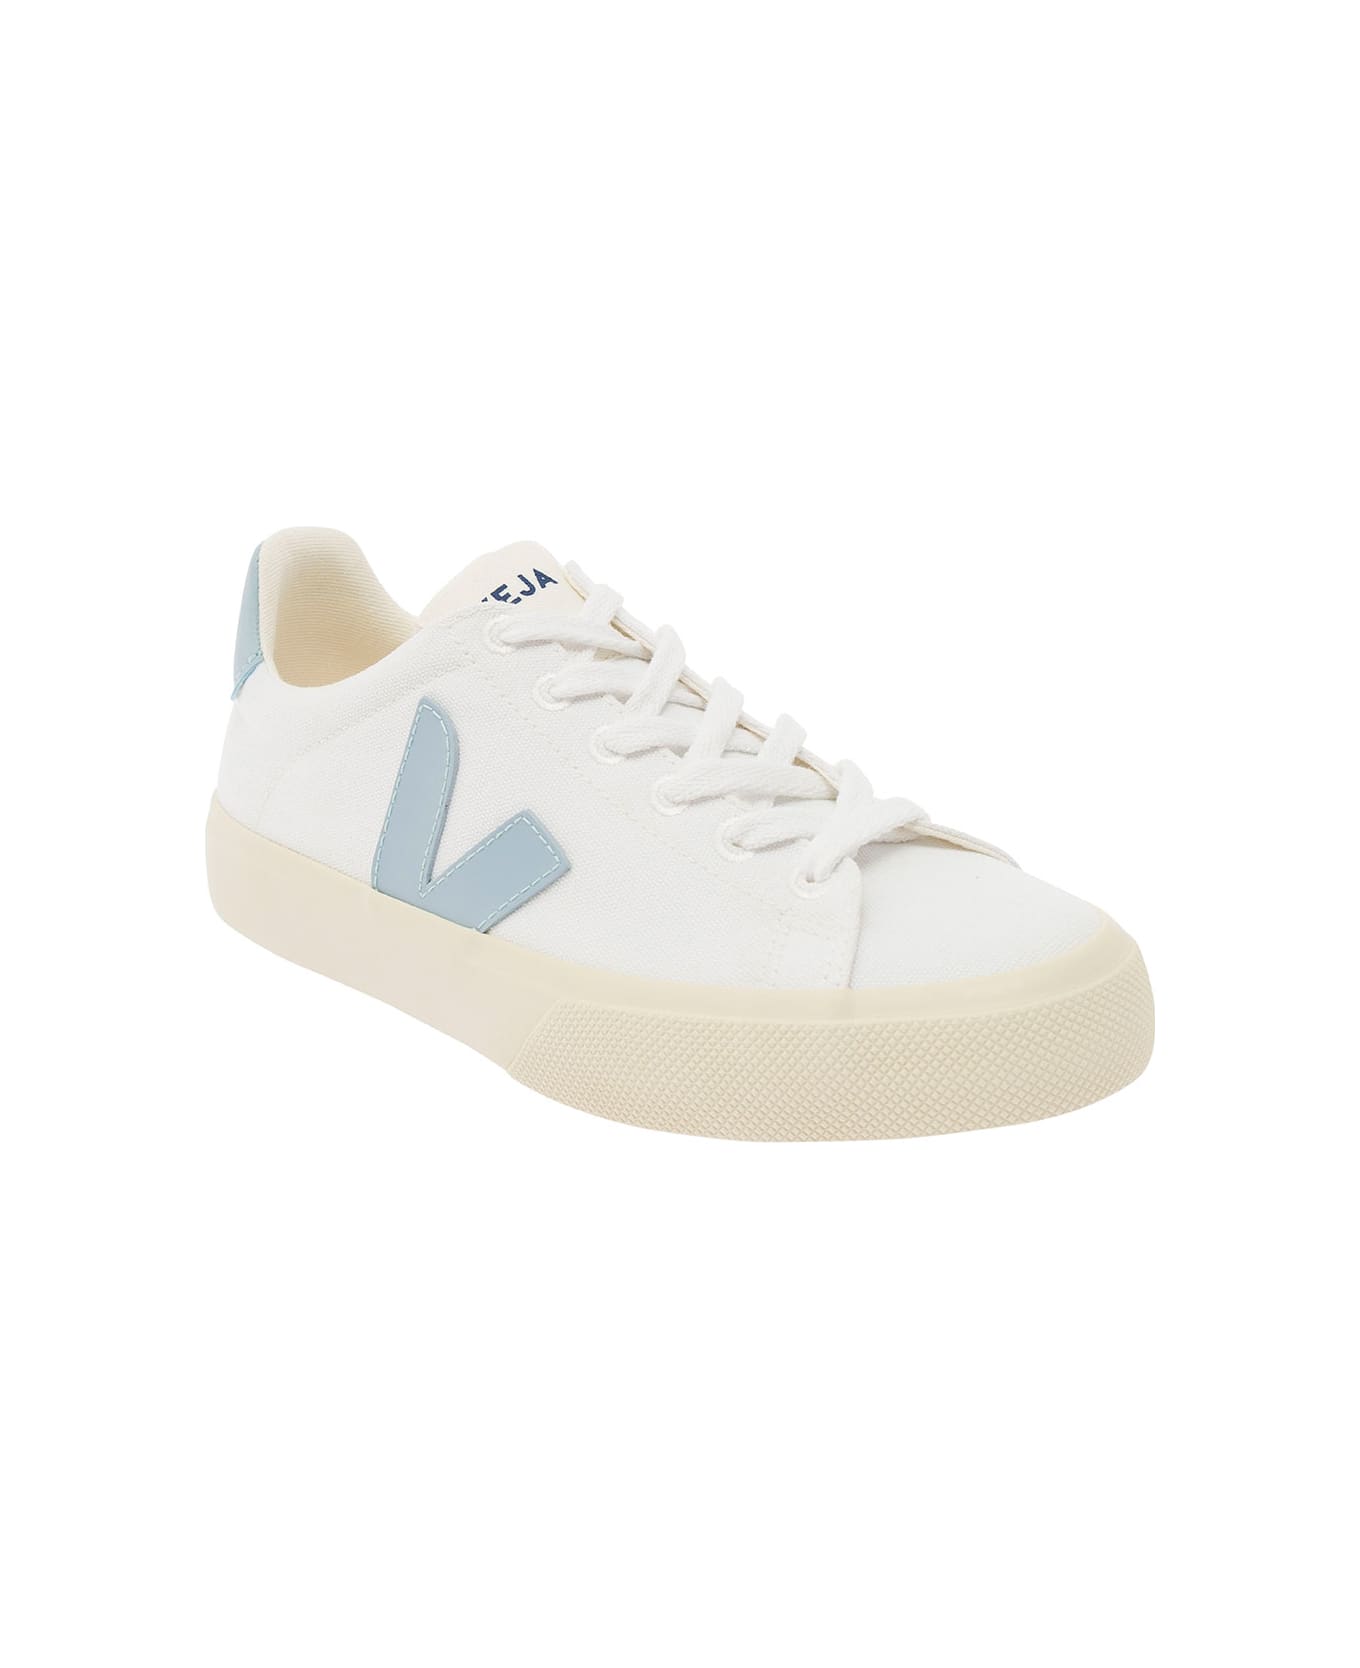 Veja White And Light Blue Sneakers With Logo Details In Leather Woman - White スニーカー